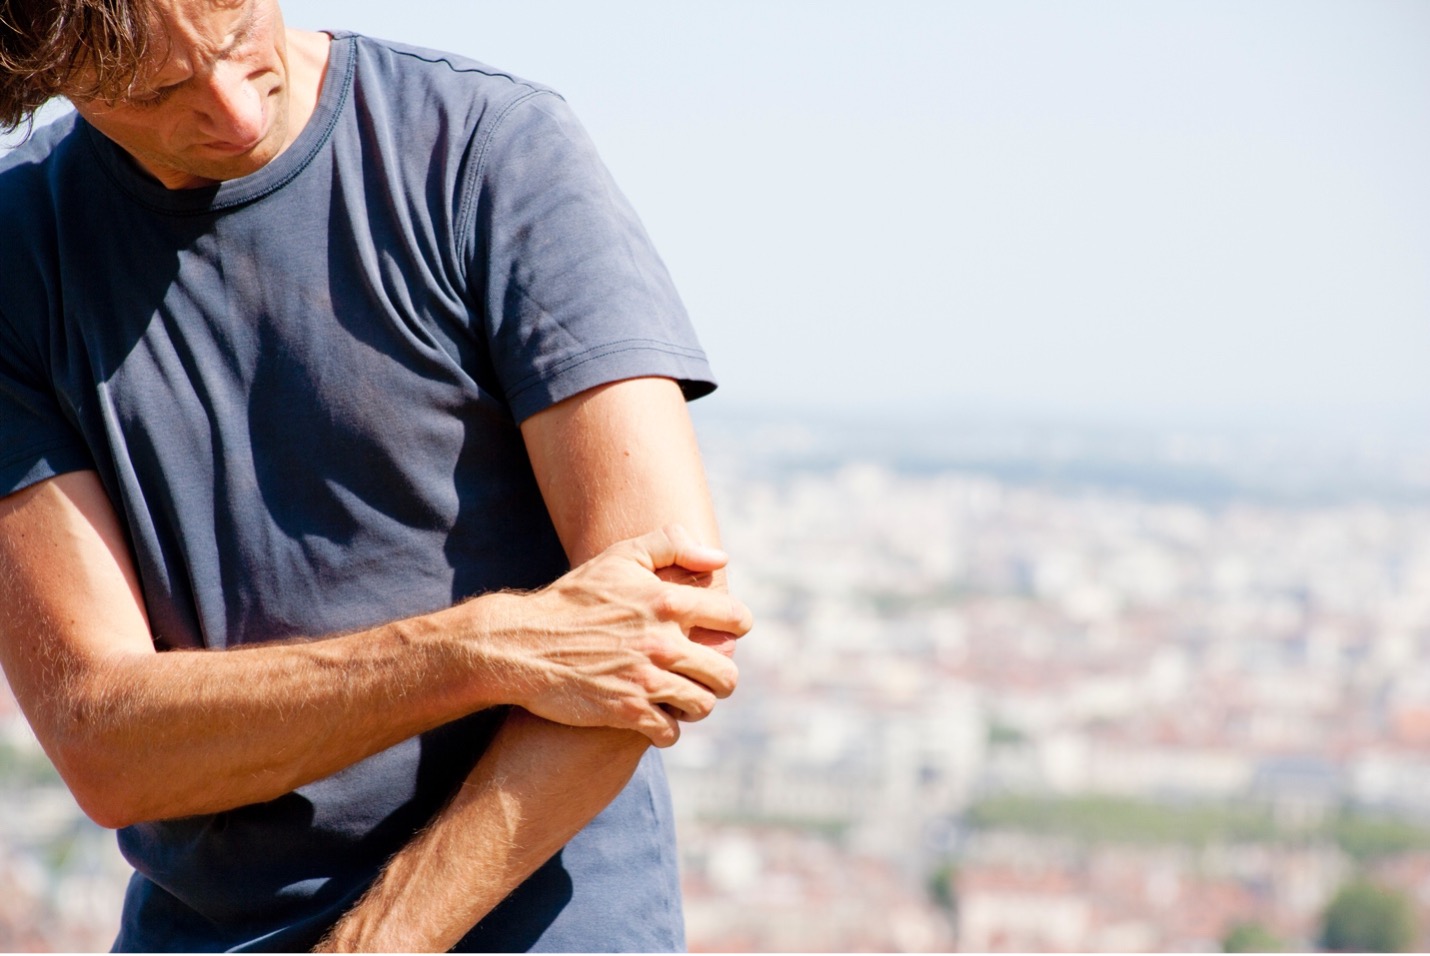 Natural Joint & Pain Management Treatments for ...